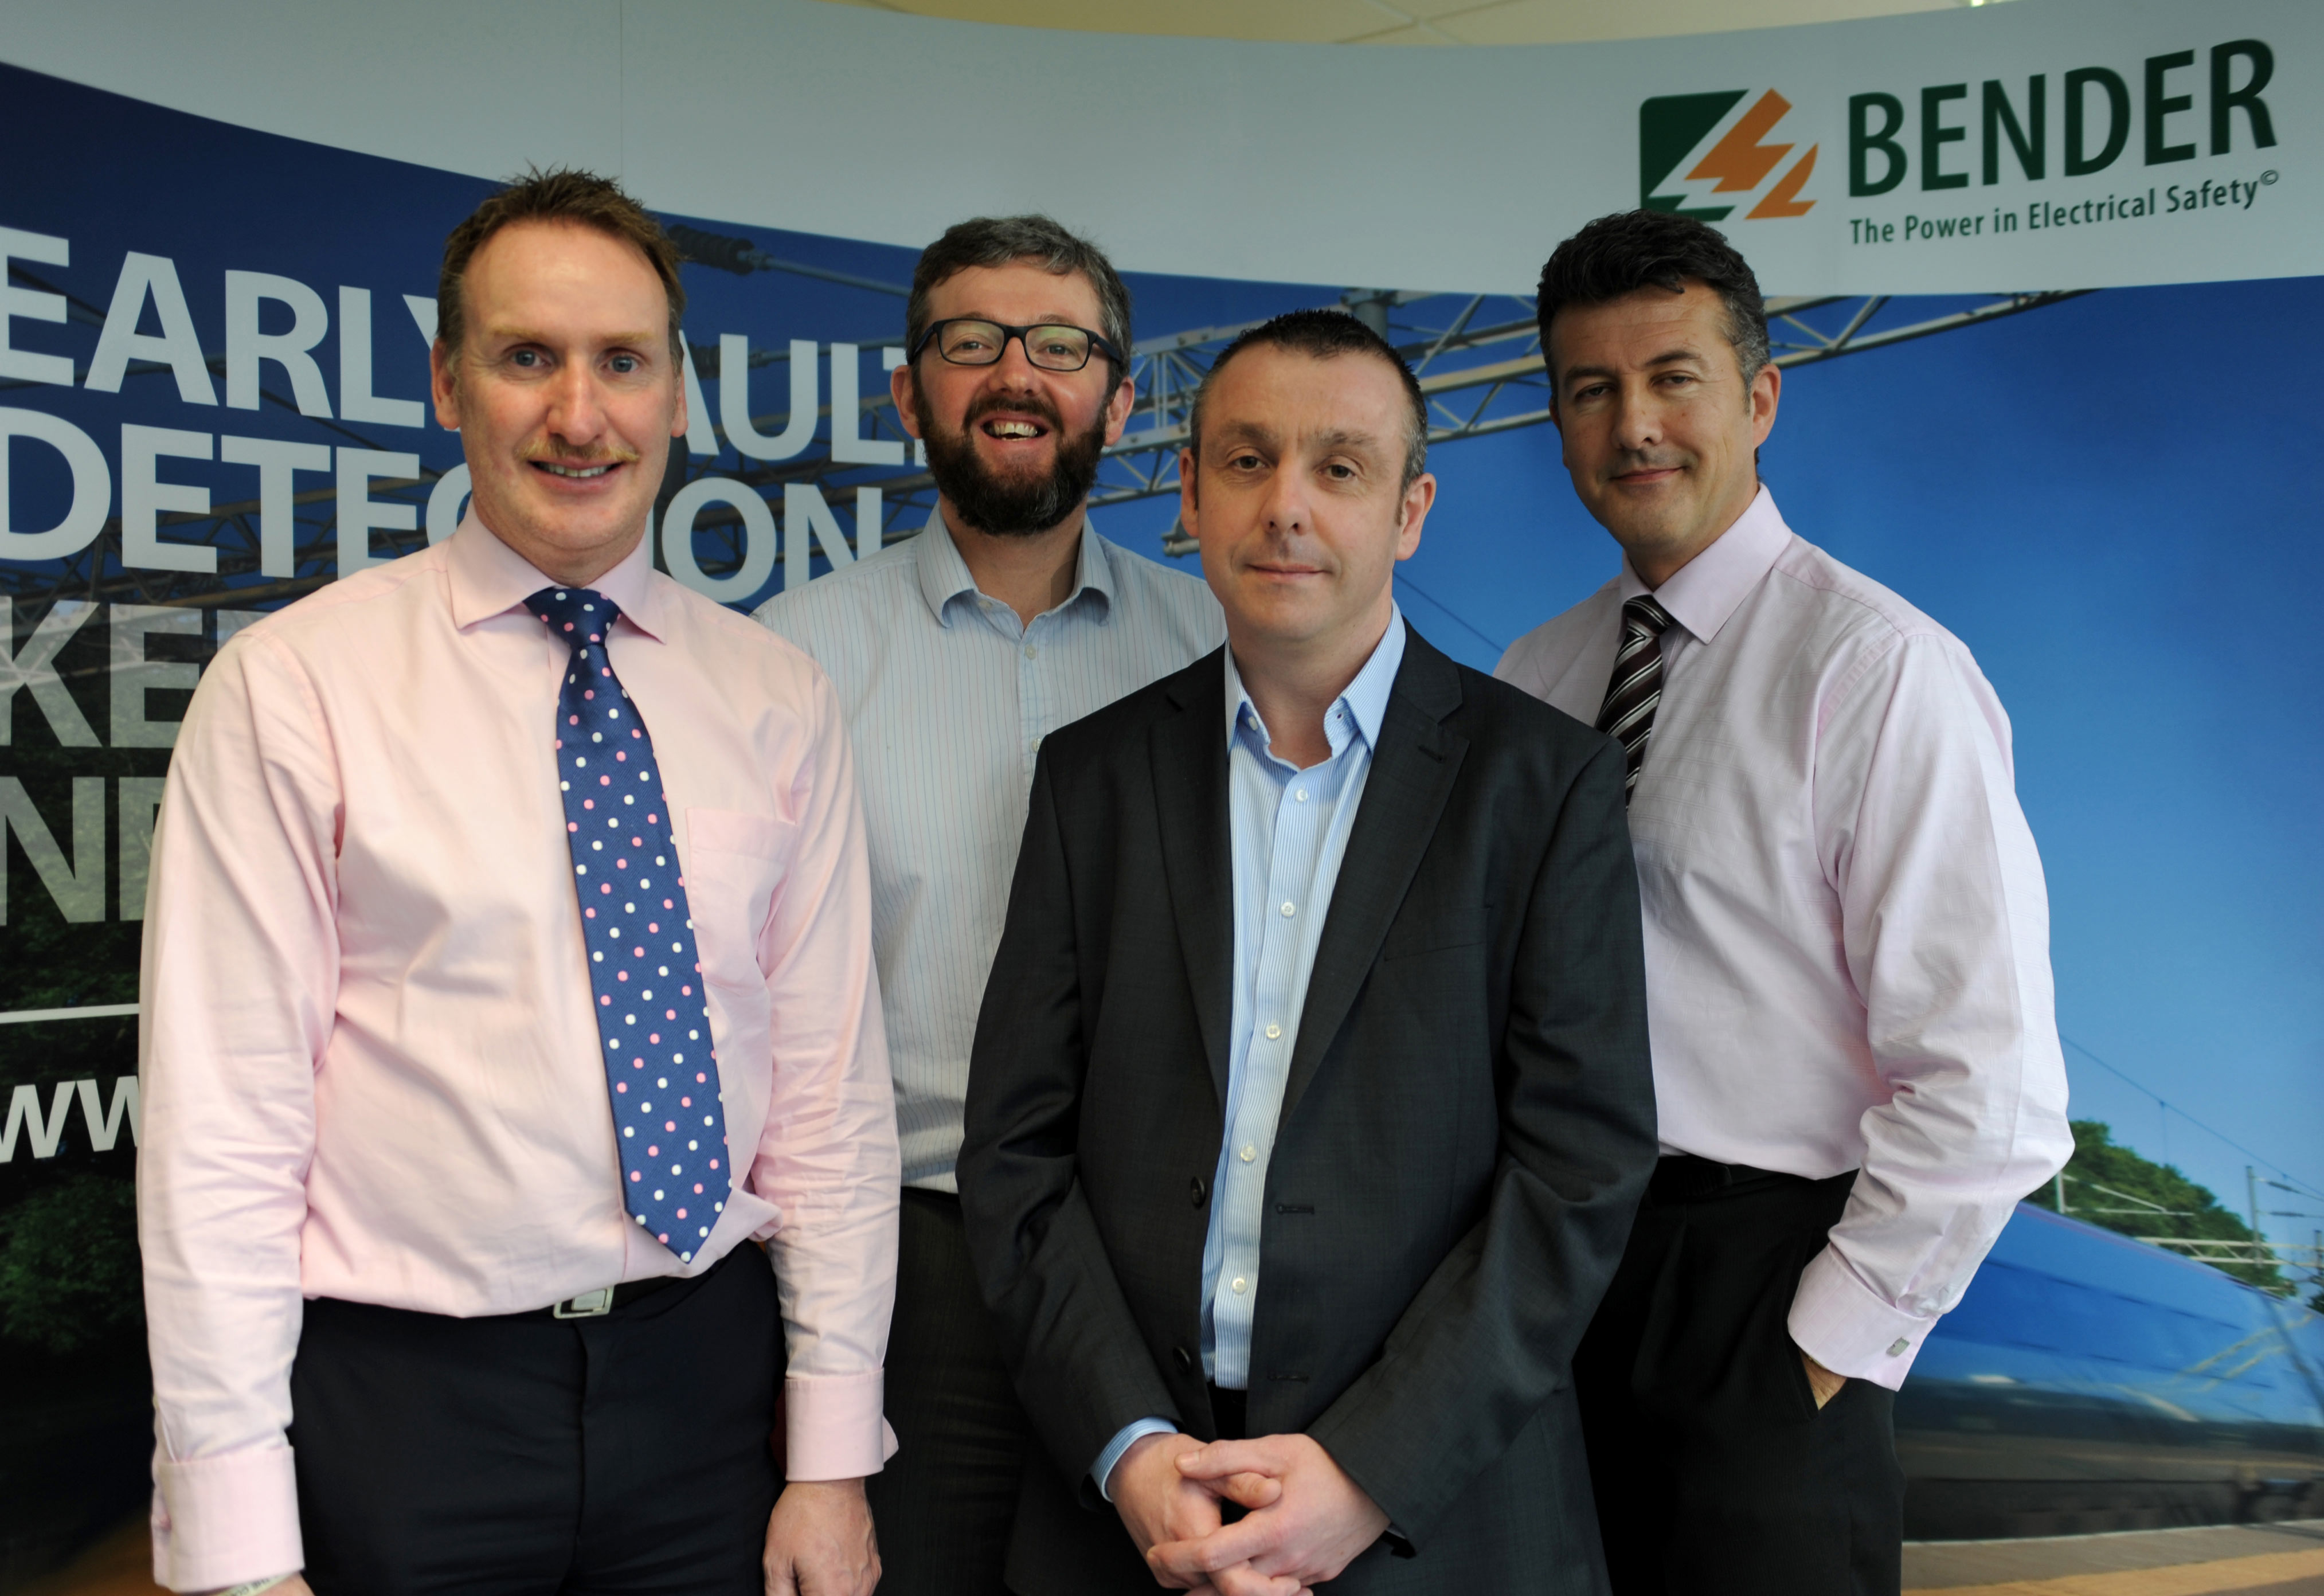 Bender UK joins forces with Giffen Group to offer turnkey rail signalling power safety solution